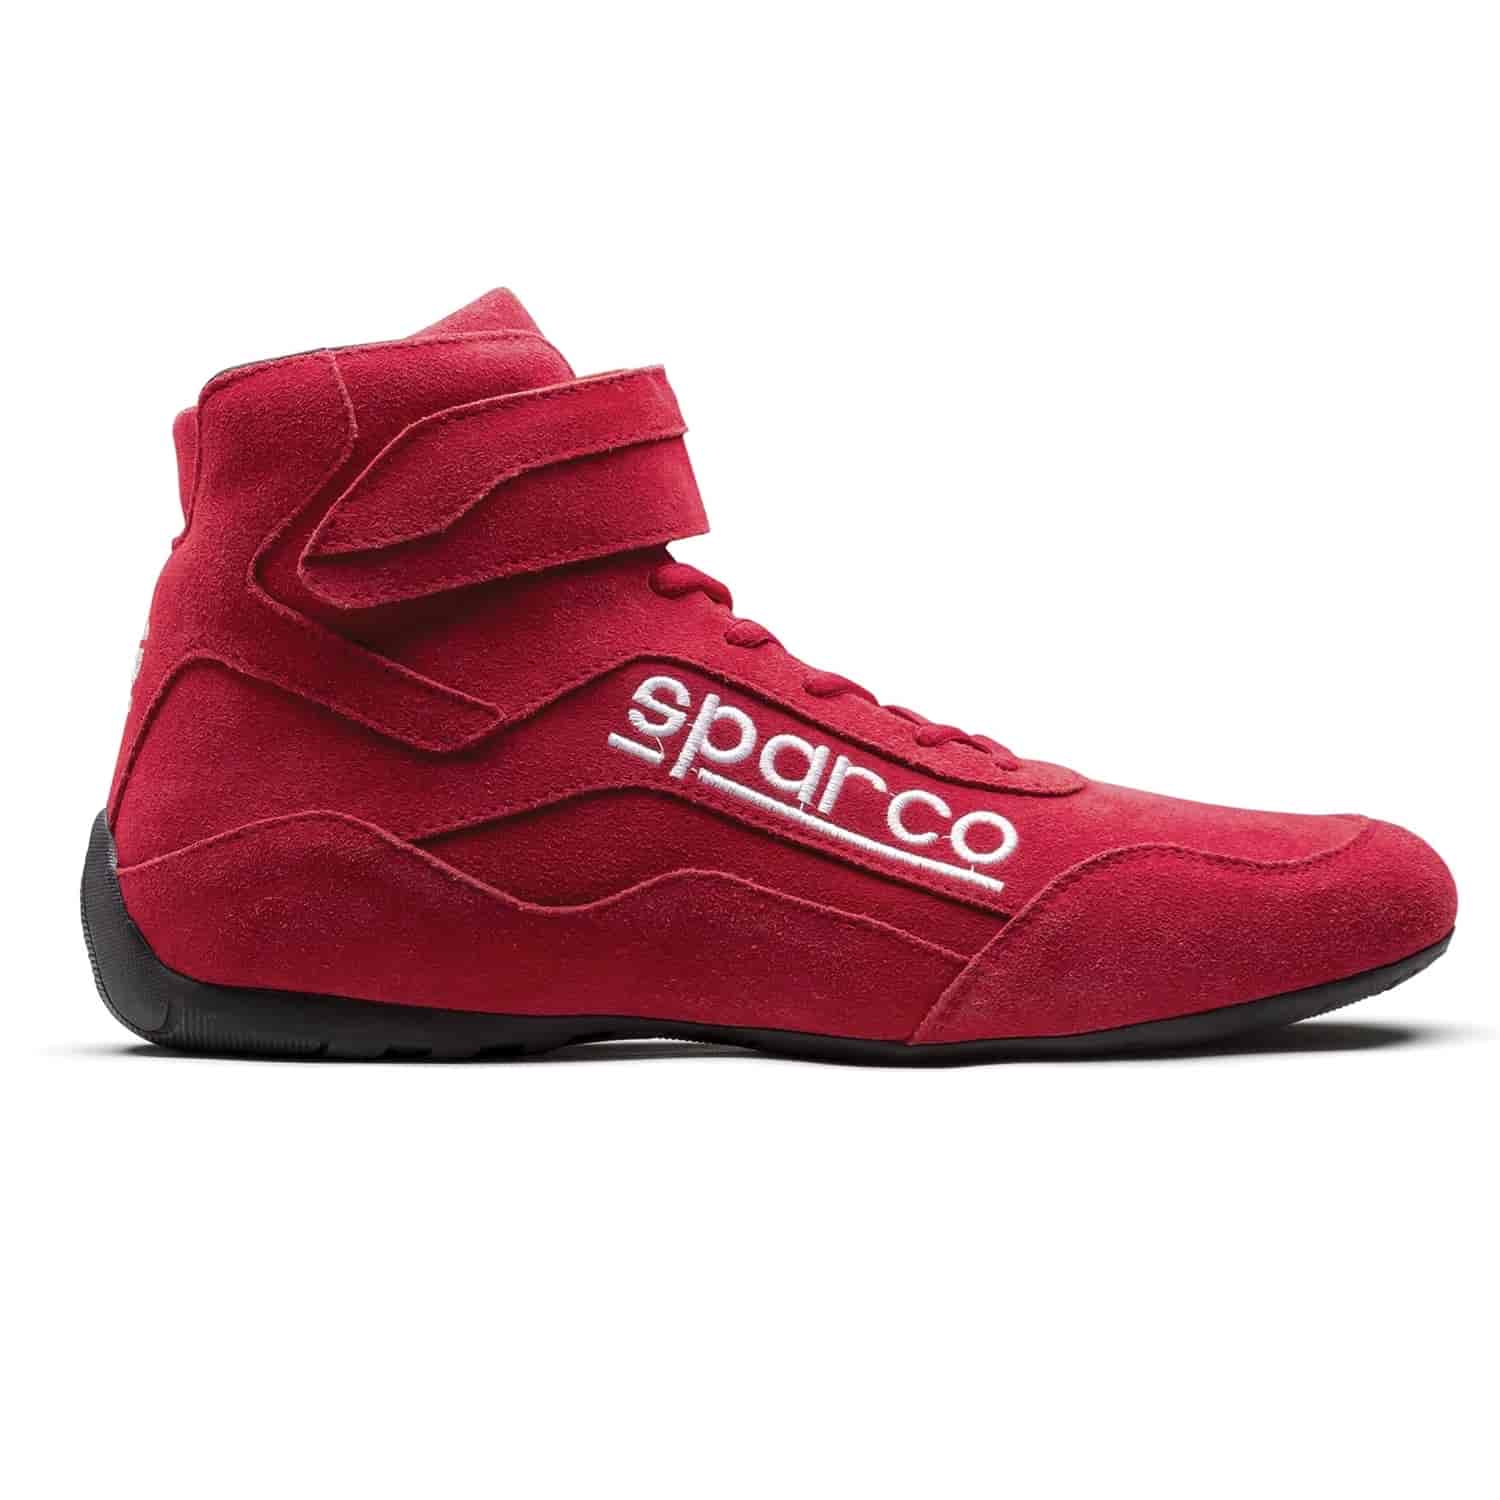 Race 2 Shoe Size 9.5 - Red